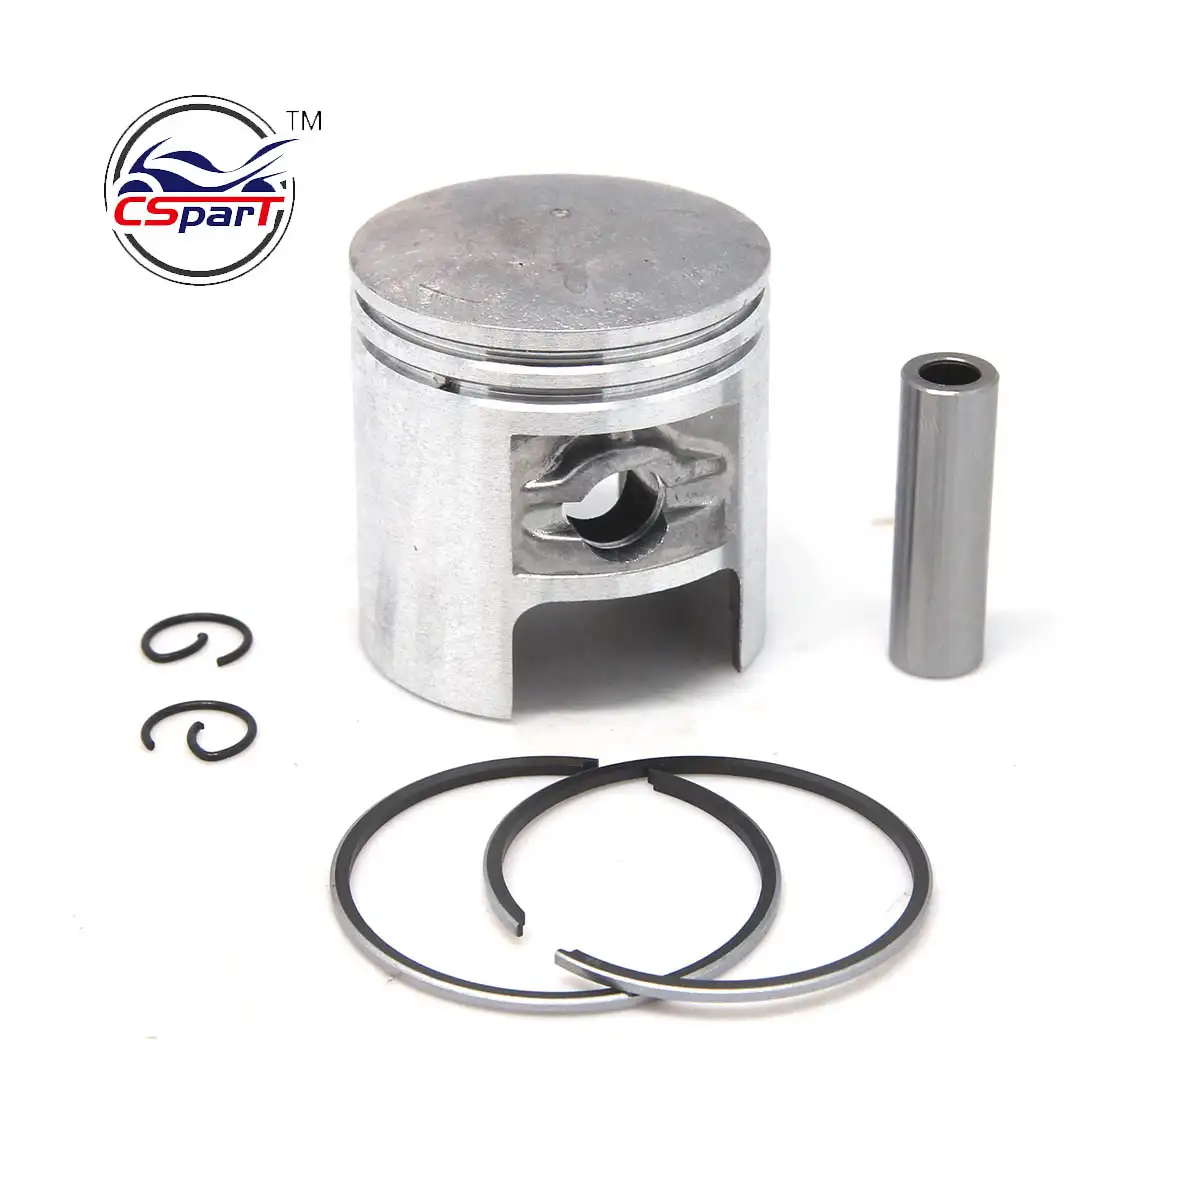 TB60 Cylinder Piston Set for Scooter TB50 D1E41QMB GEELY 50 43mm Big Bore Kit